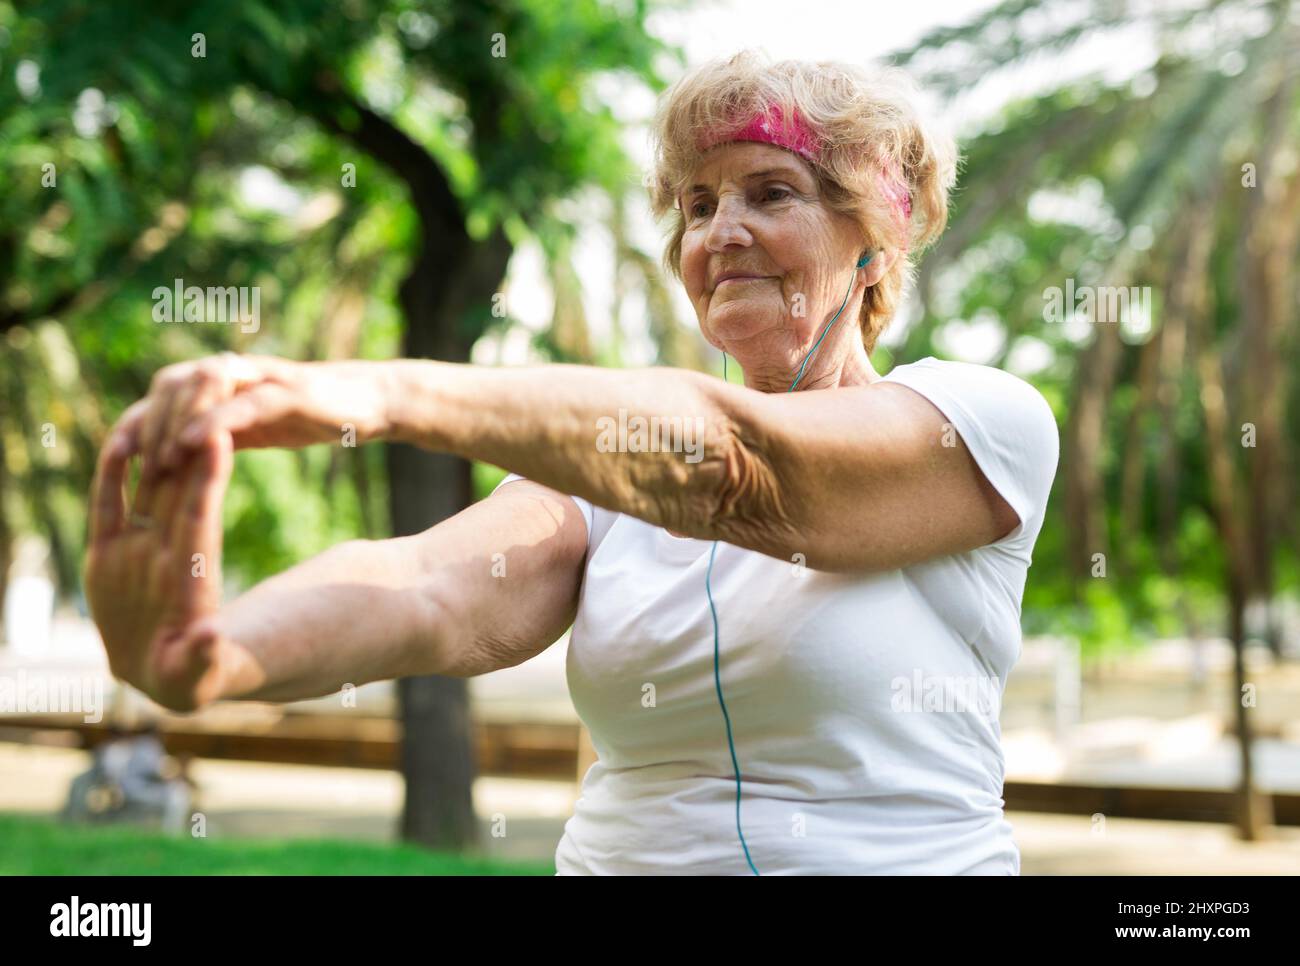 Old lady doing fitness exercises in park Stock Photo